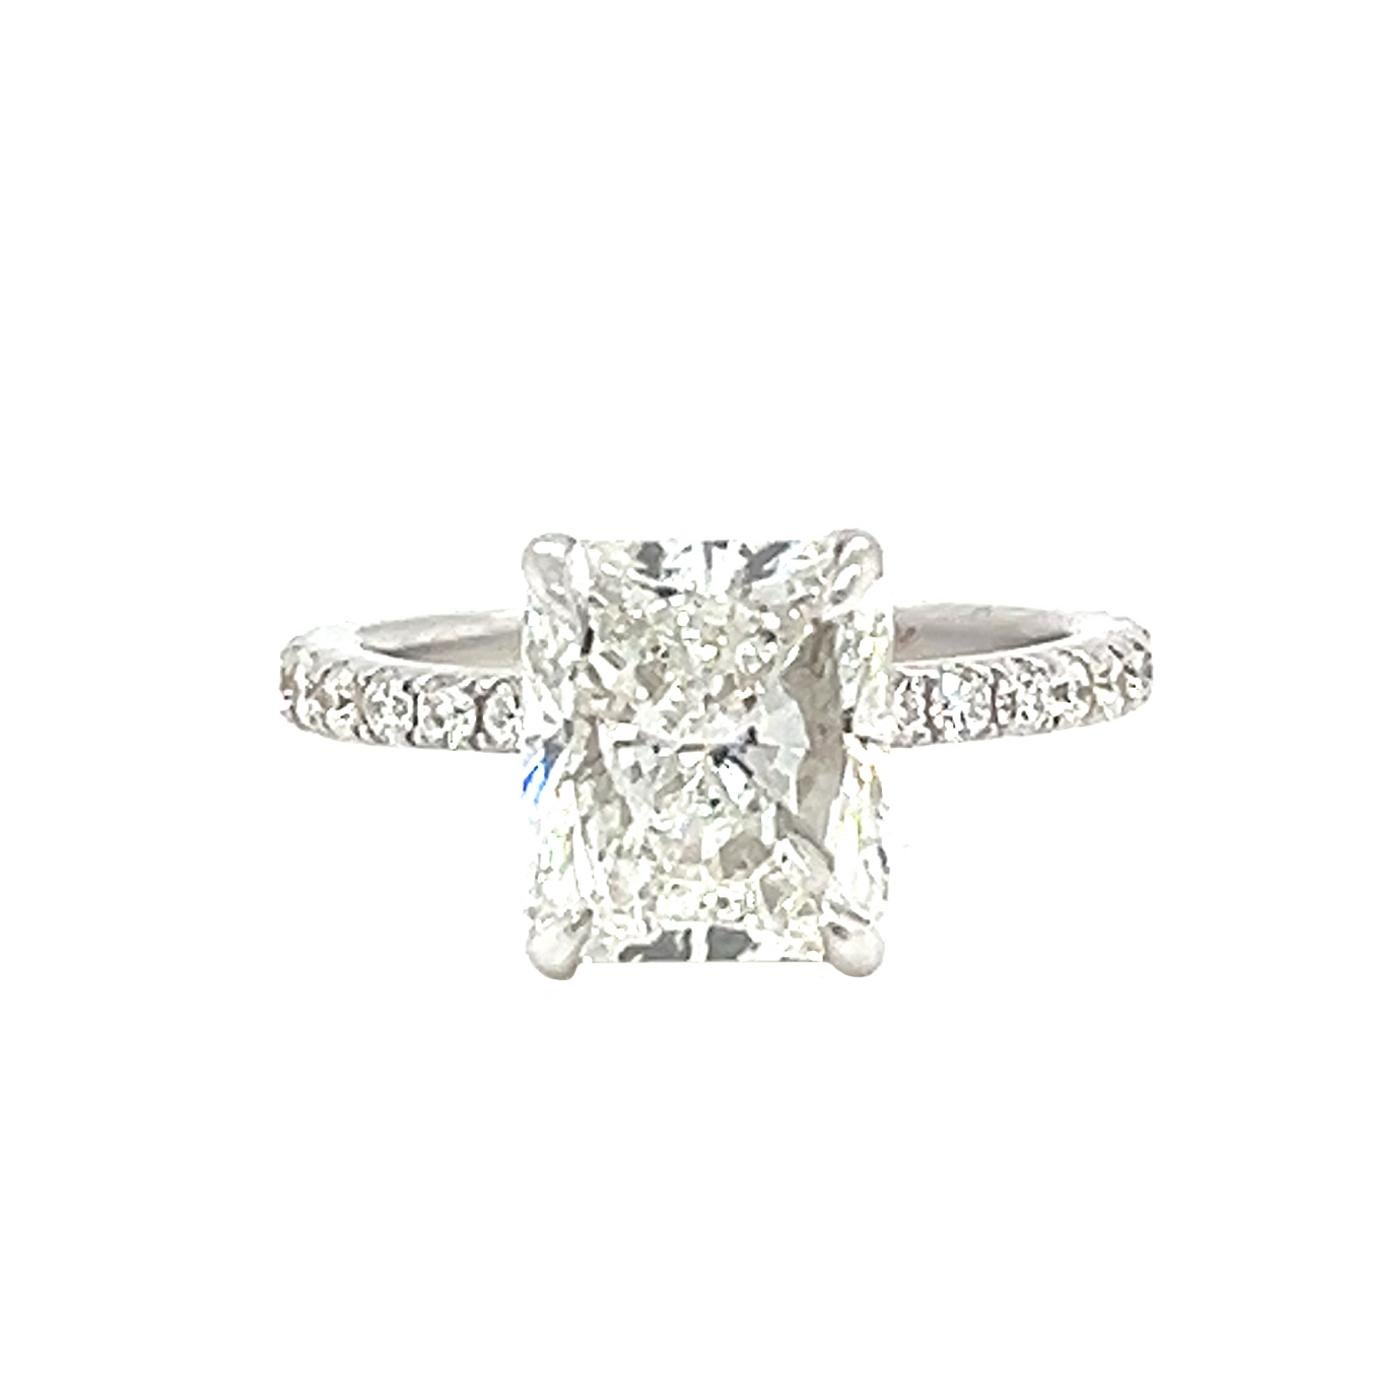 GIA 3.03ct Natural Radiant Cut Diamond with Pave Diamonds Ring 18k White Gold For Sale 2